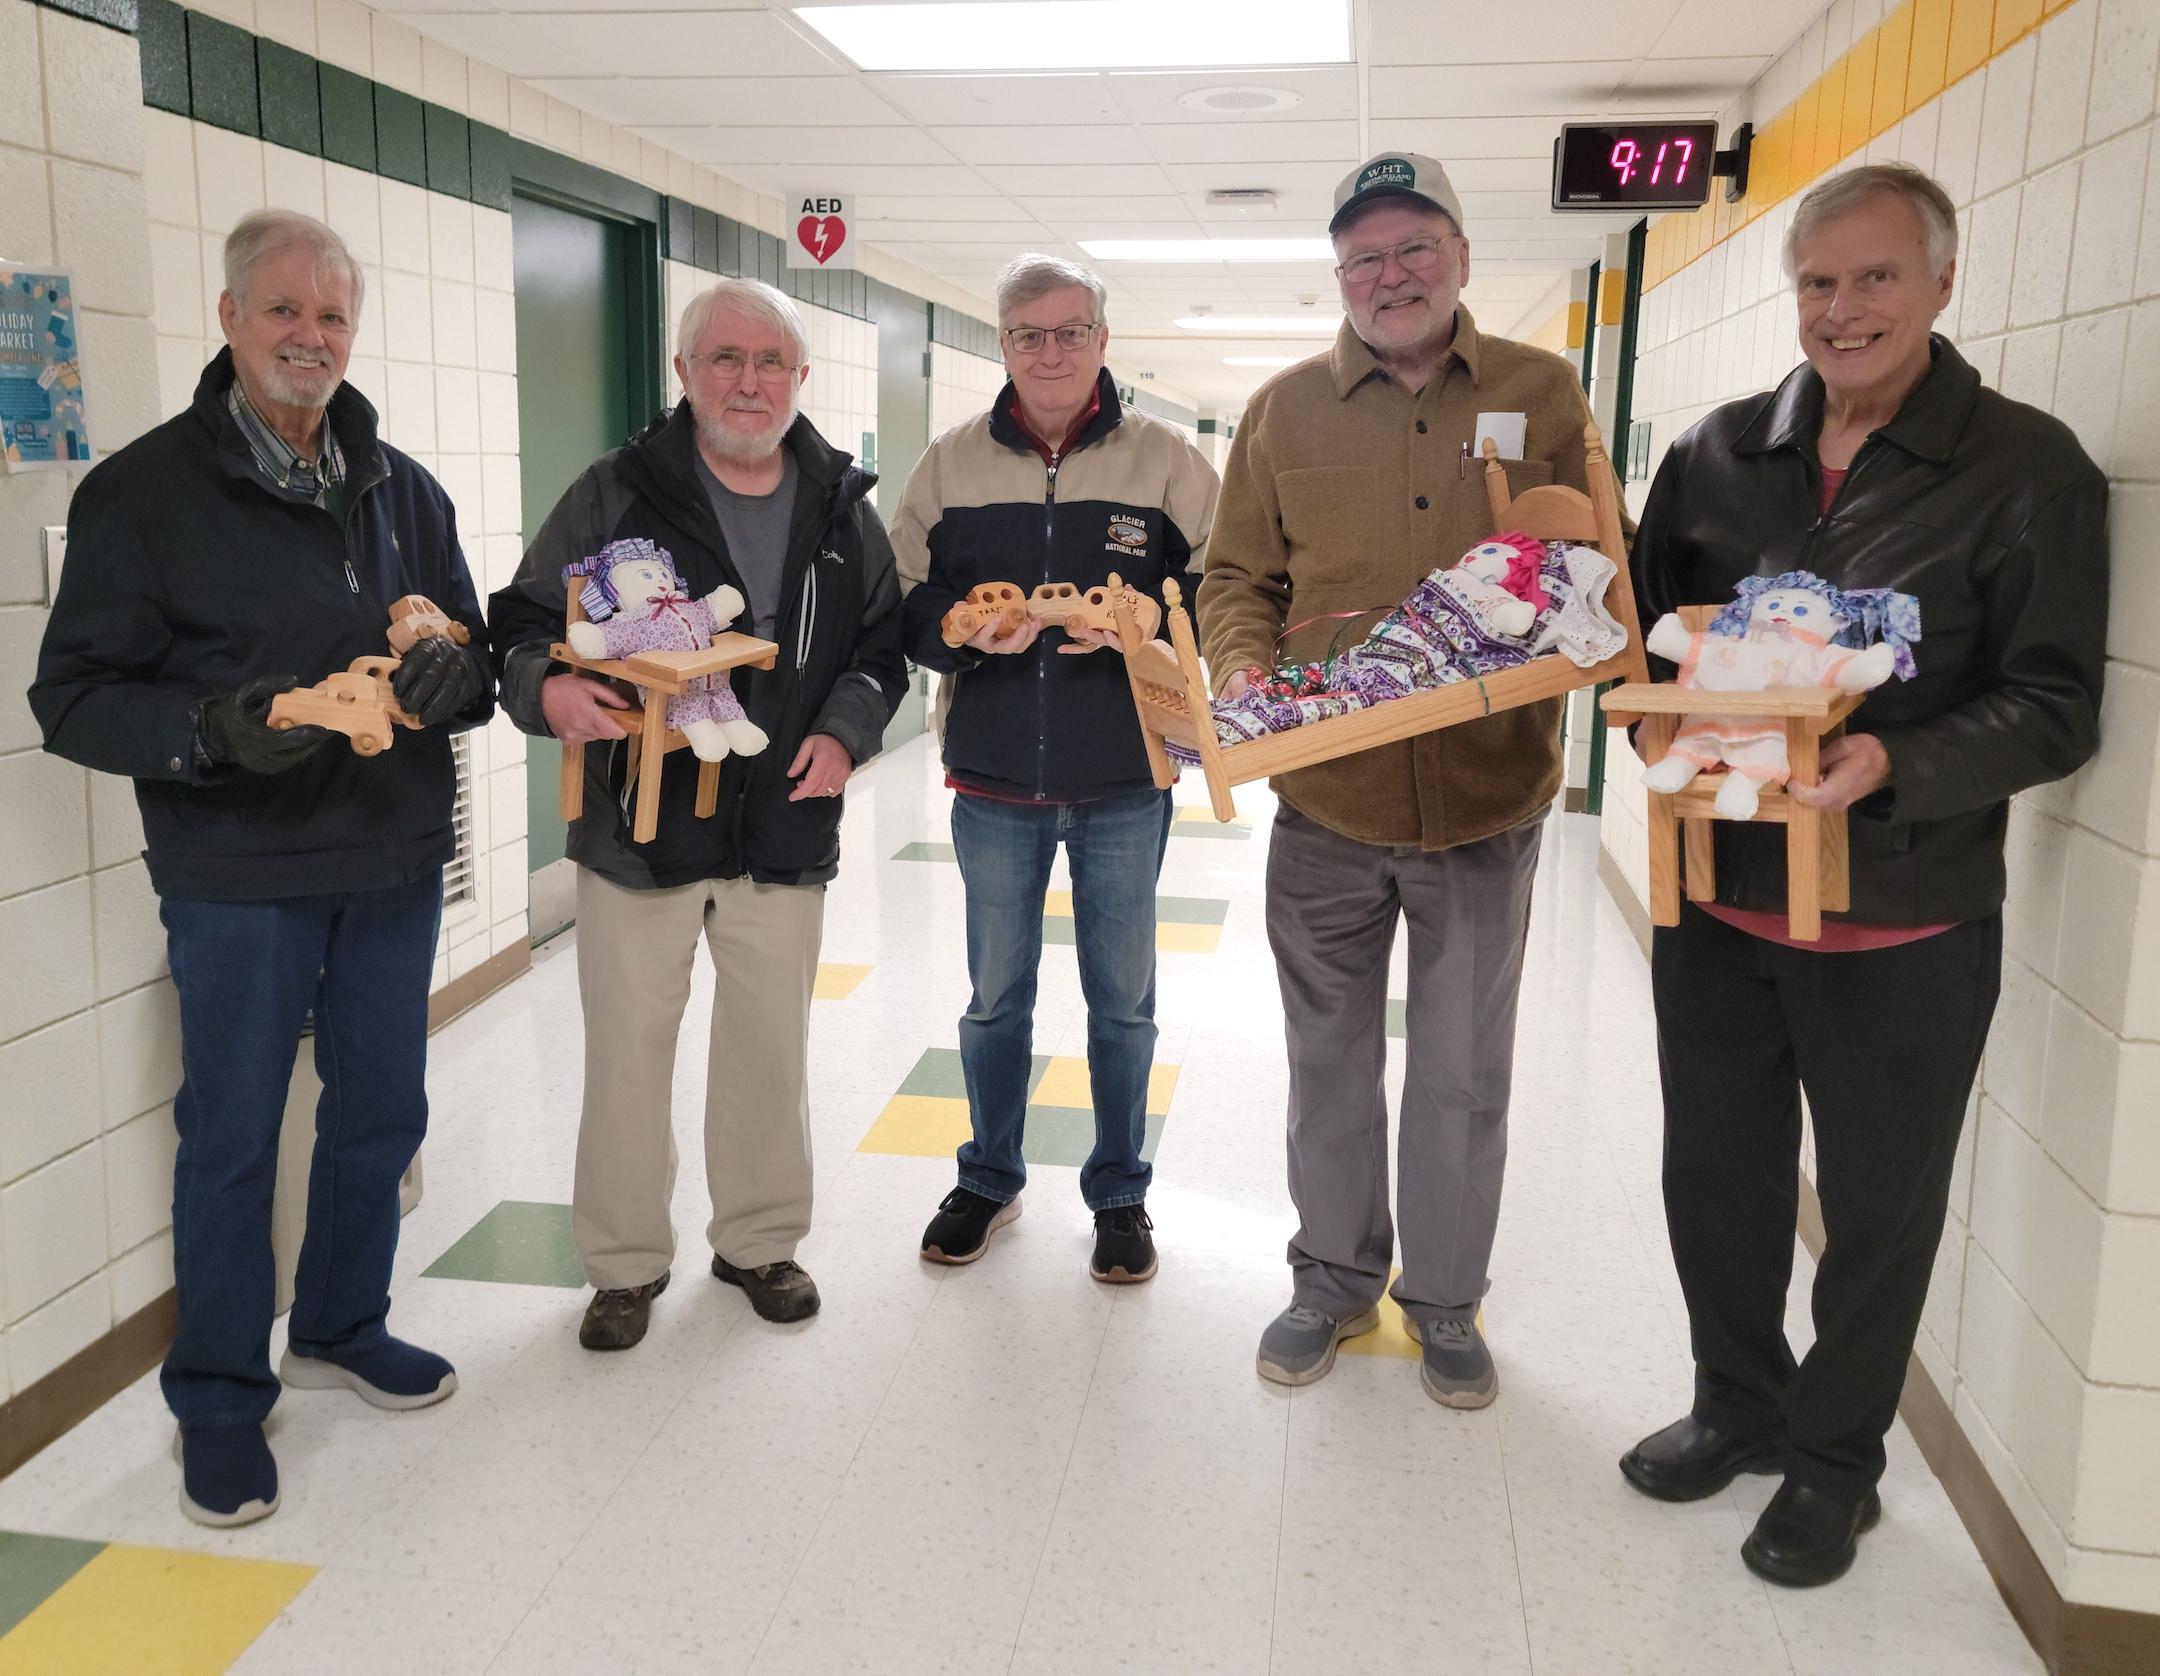 The Wood Chippers donated many handmade, wooden toys:  (left to right) Joseph Merante, Ron Shiner, Mike Hermsen, Stan Rudge, and Jim Costlow